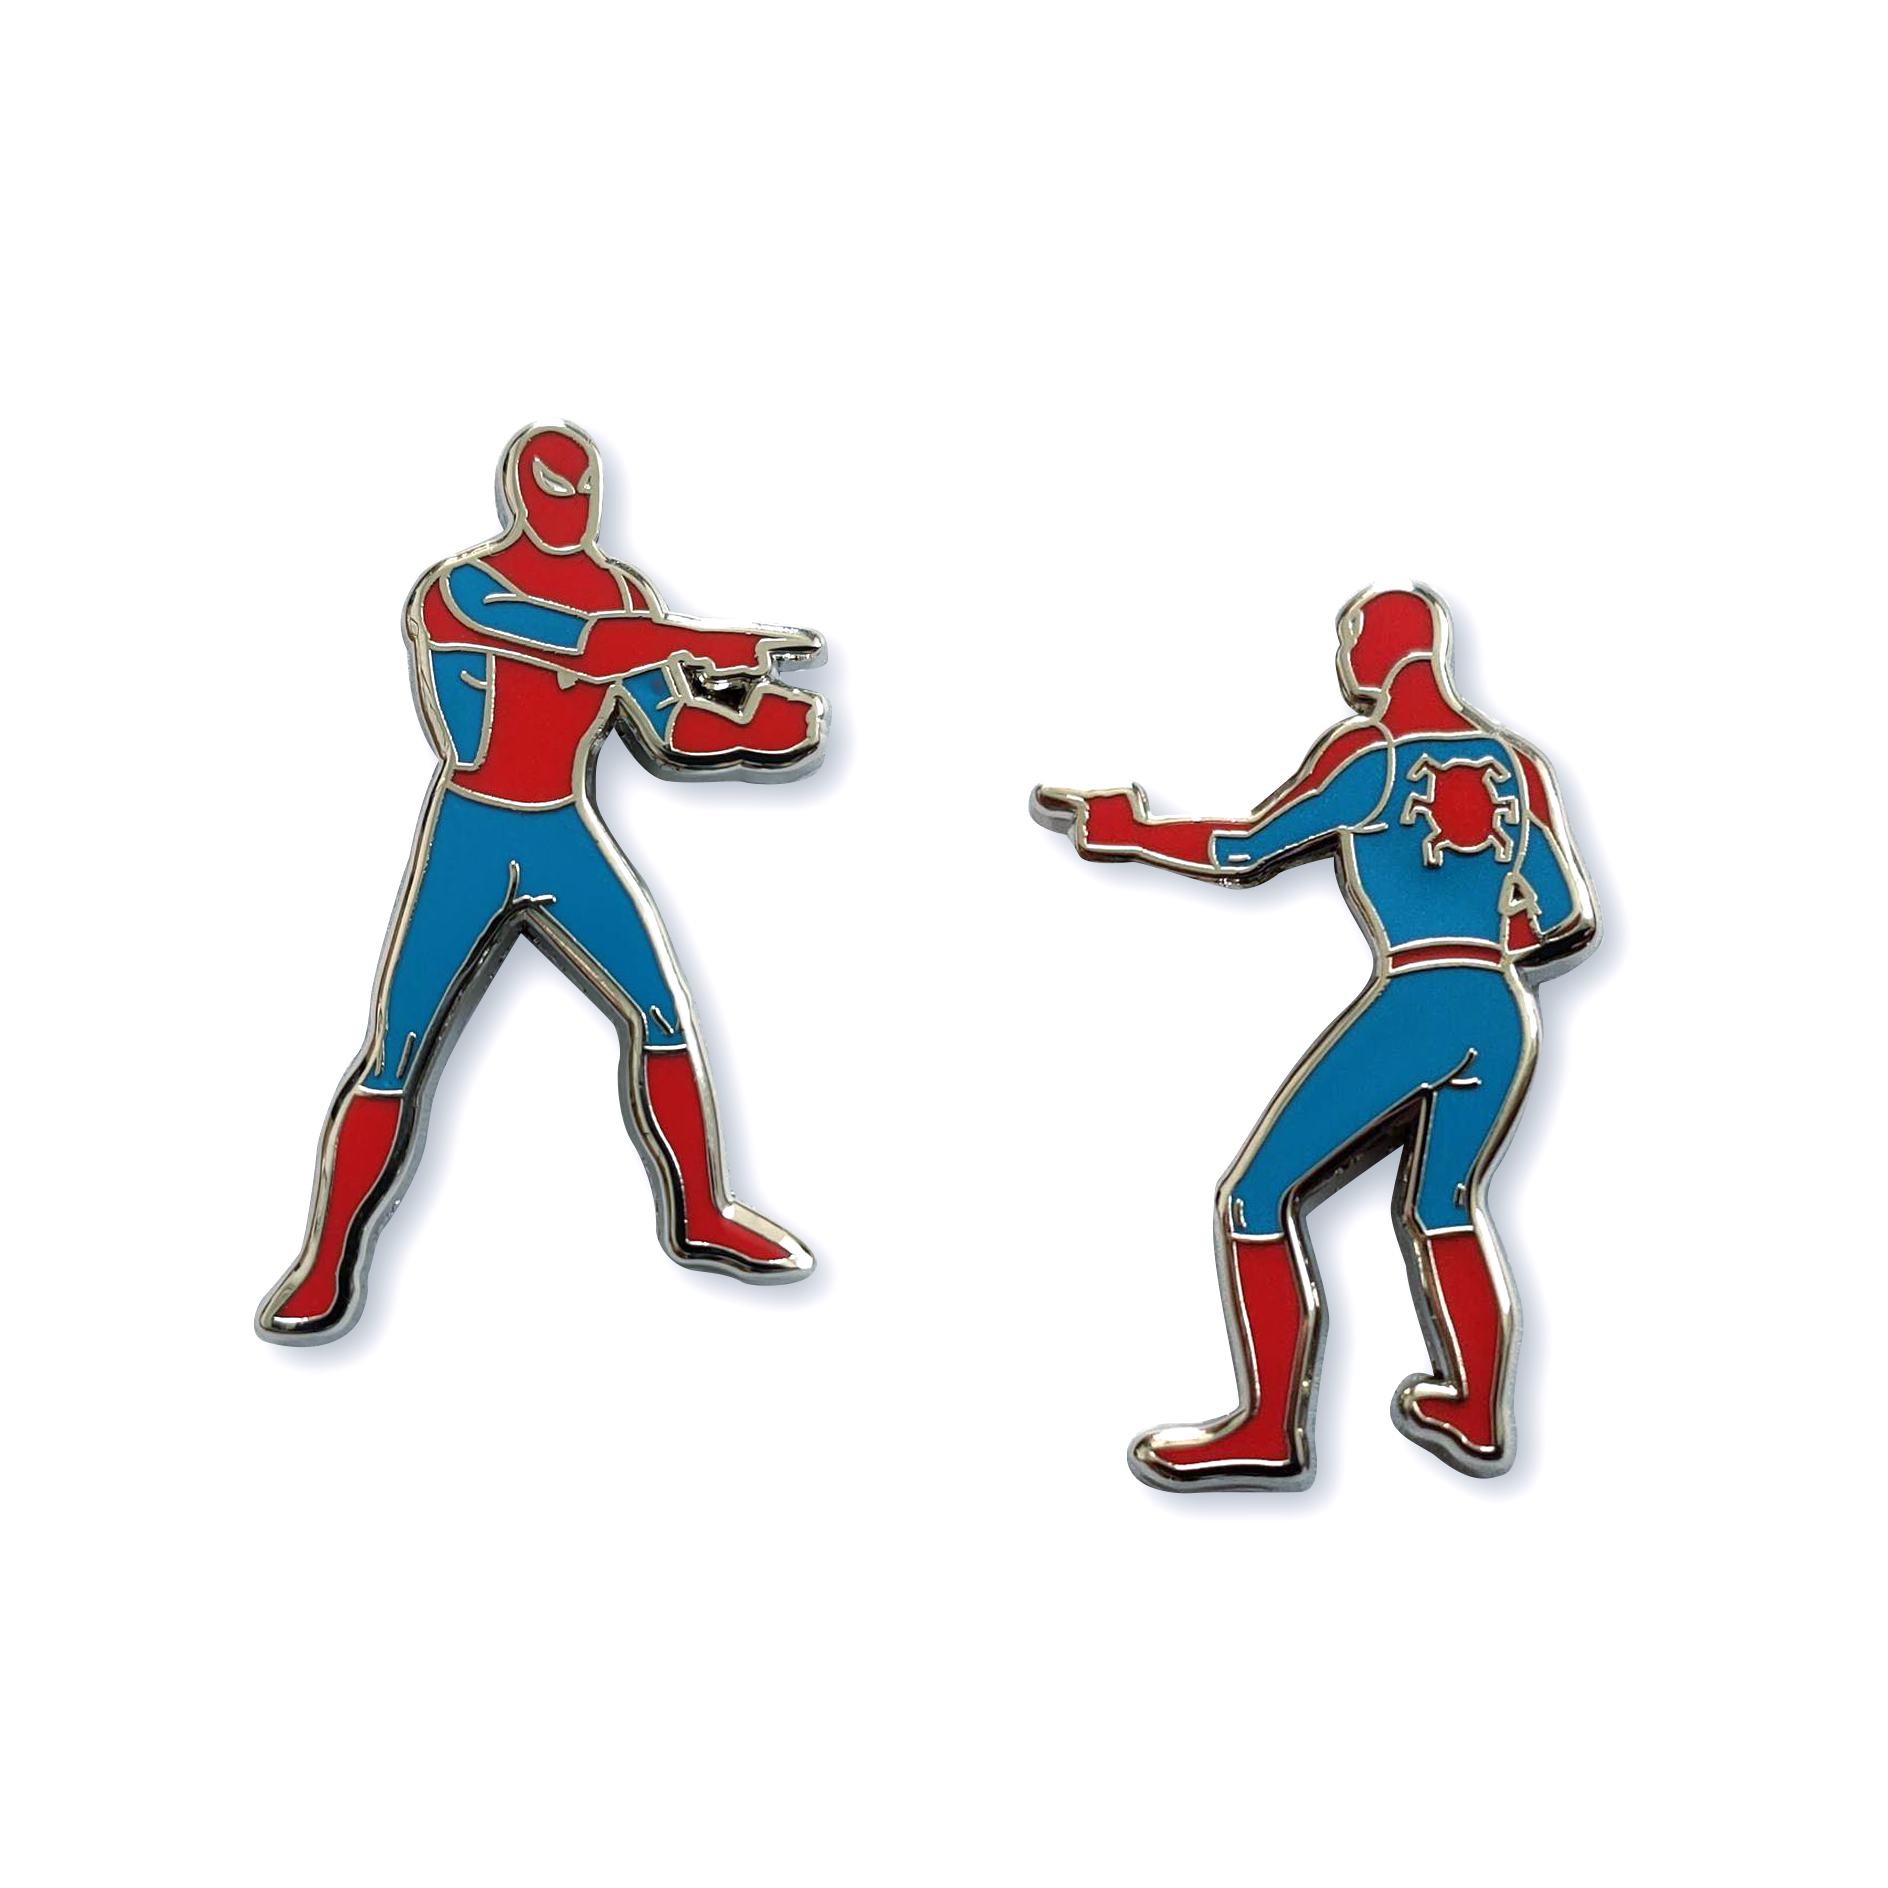 I Miss SDCC Silver VARIANT San Diego Comic Con 2020 Pin Yesterdays 